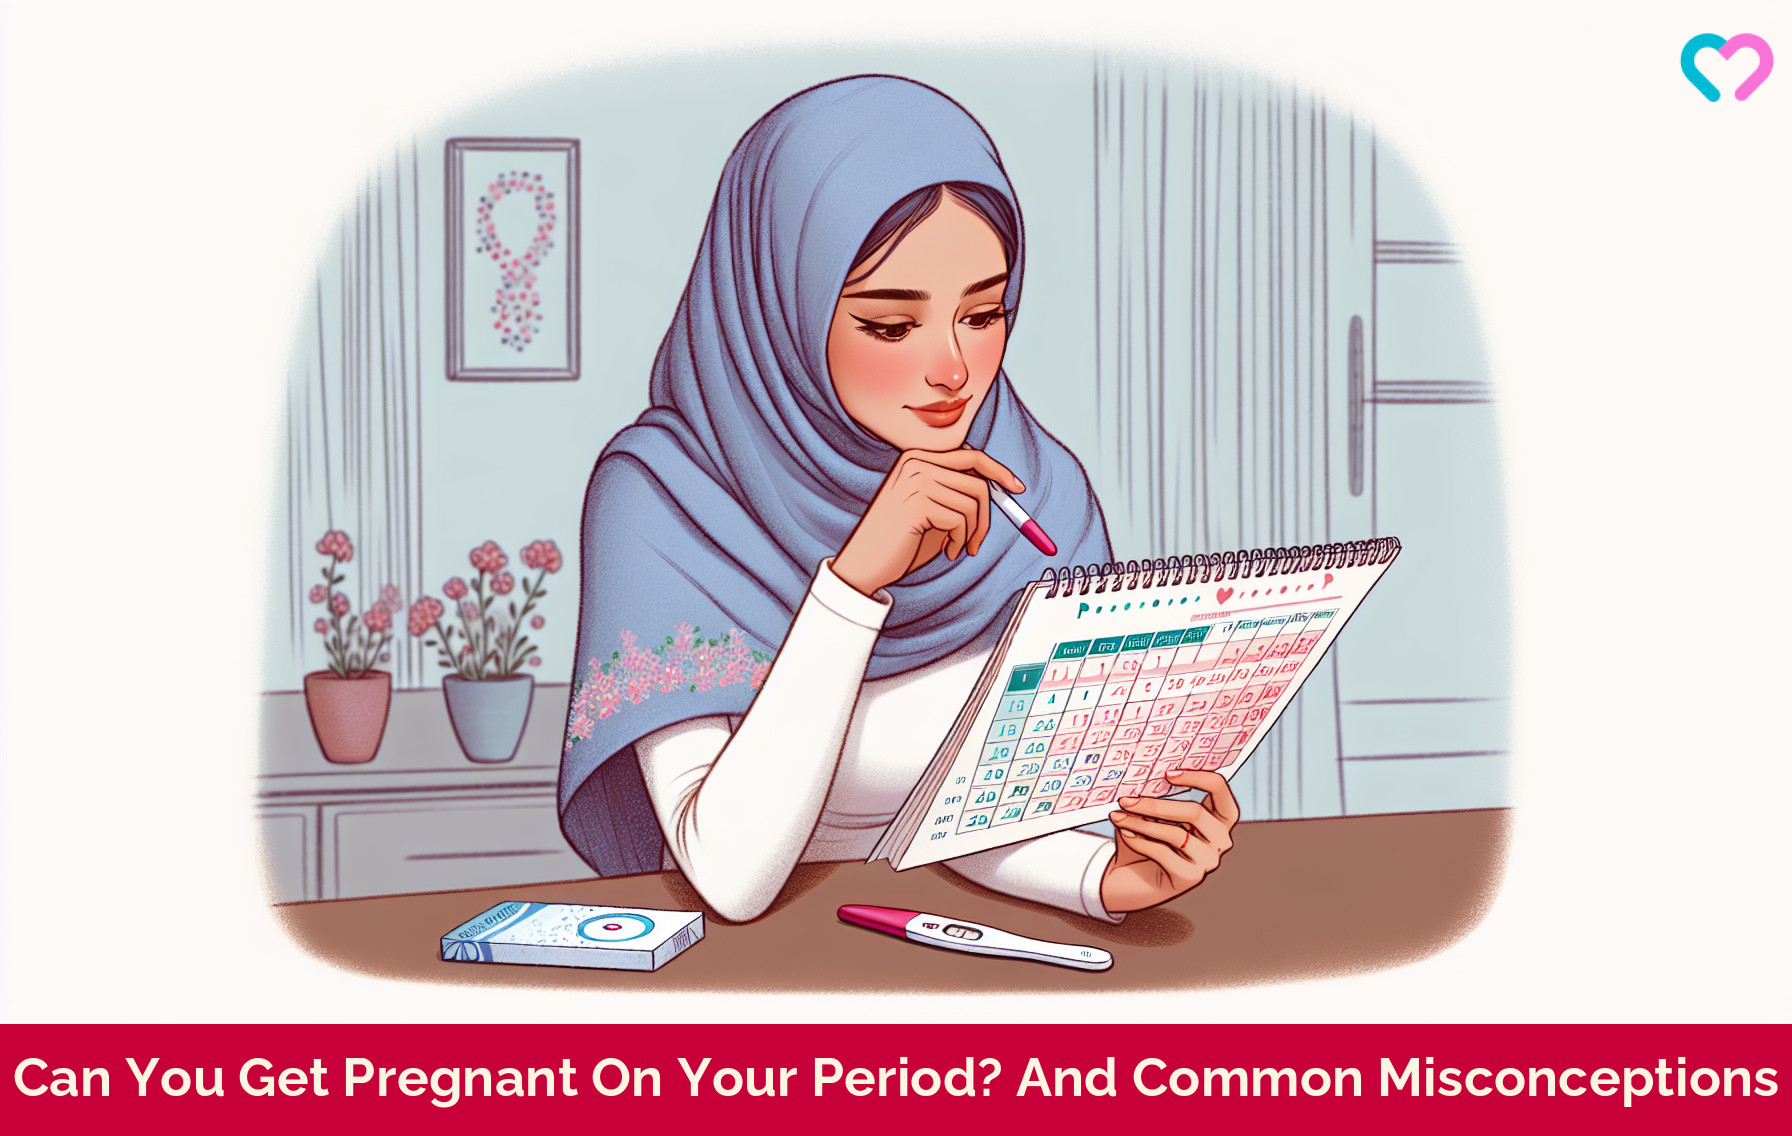 can you get pregnant on your period_illustration